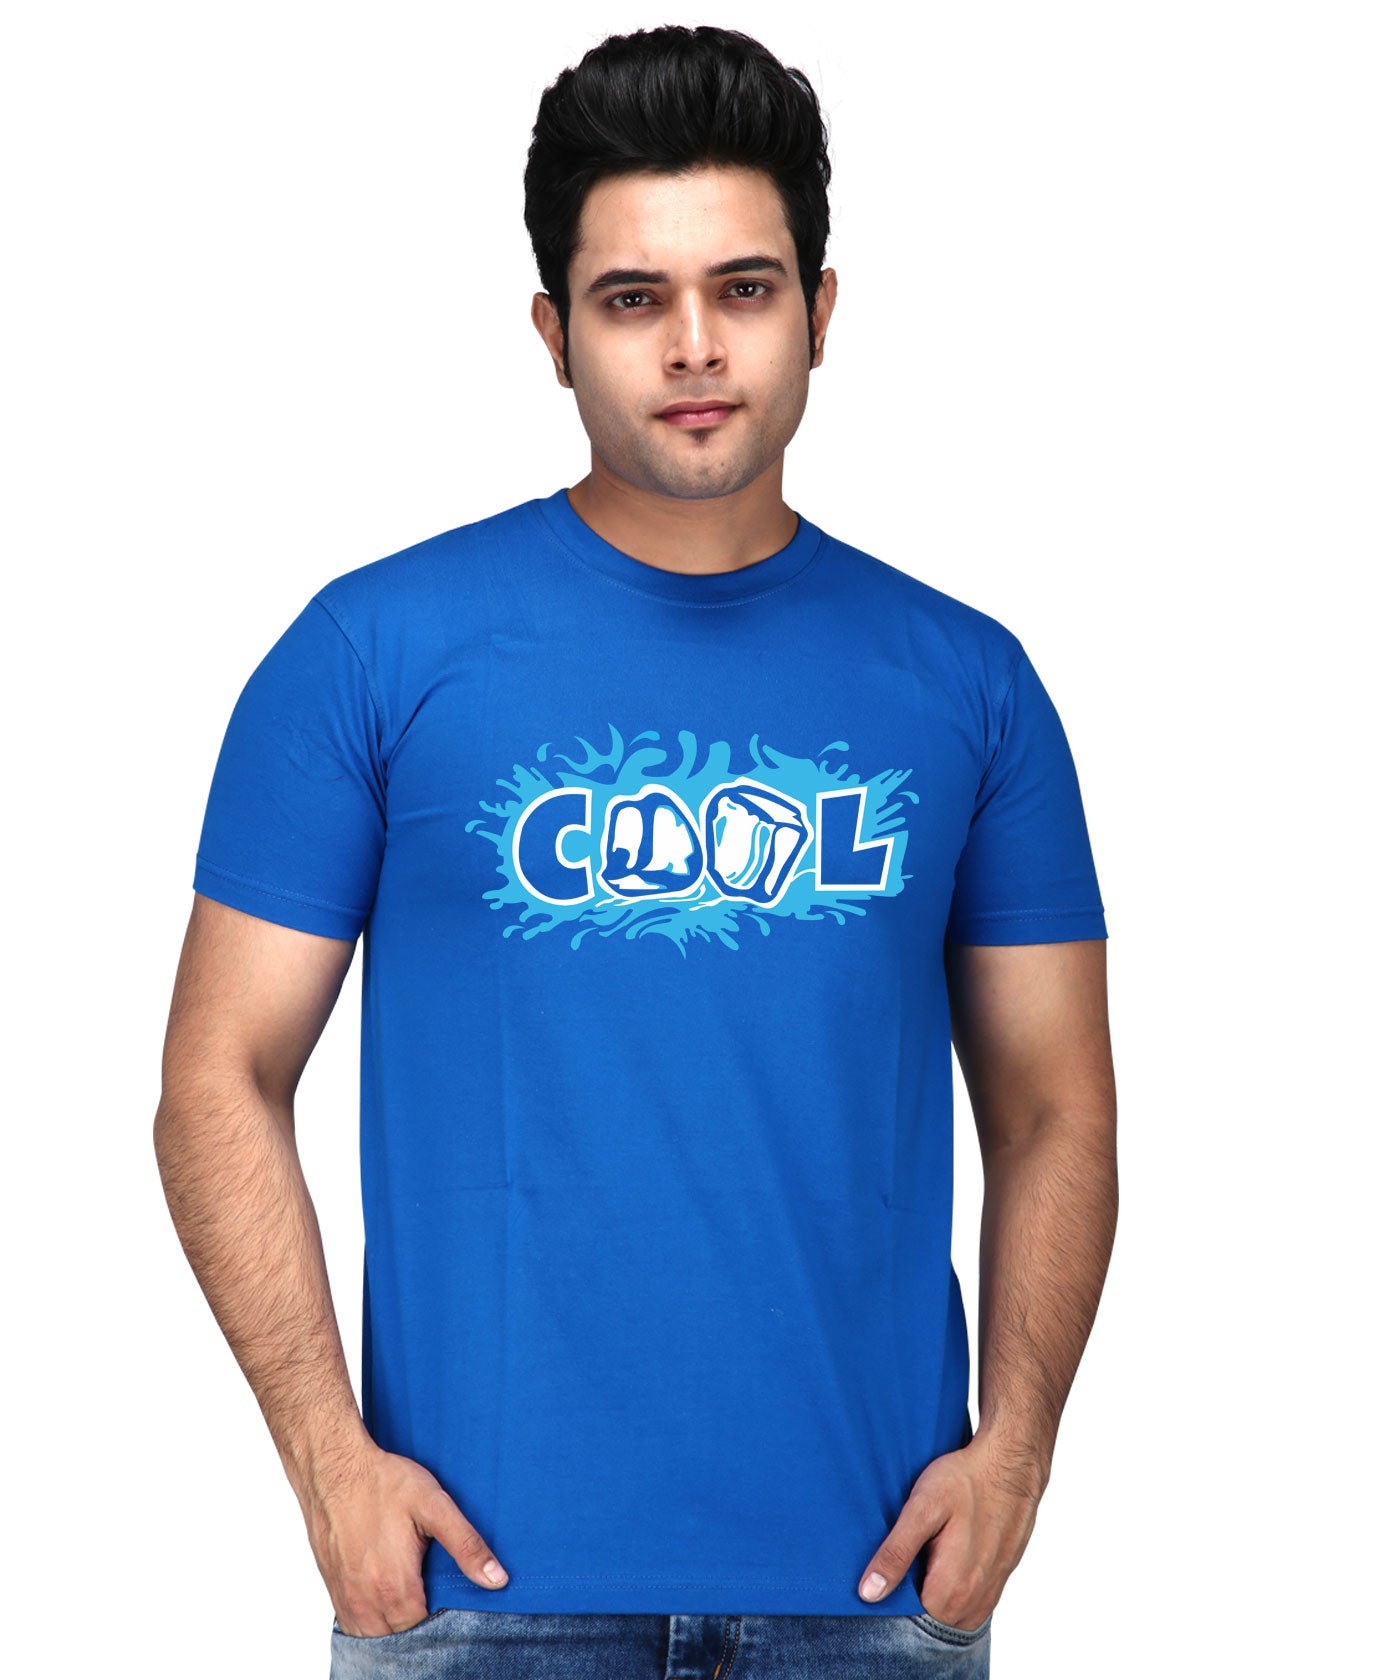 Ice Cool - Premium Round Neck Cotton Tees for Men - Electric Blue